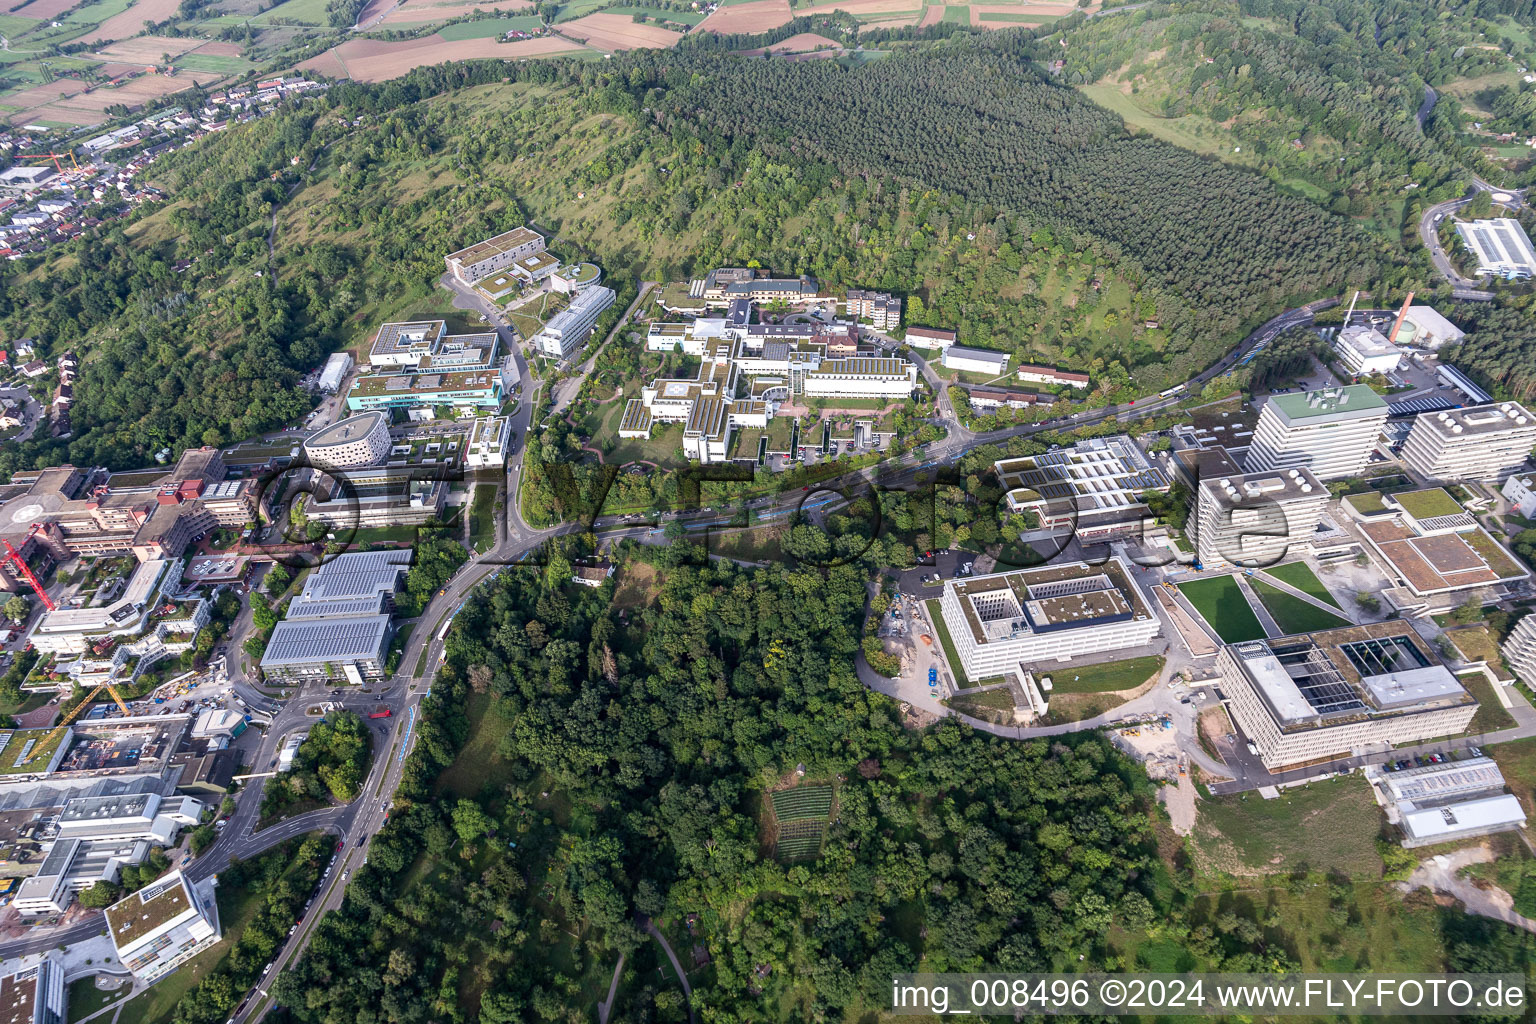 Aerial view of Hospital grounds of the Clinic Medizinische Universitaetsklinik on Schnarrenberg in Tuebingen in the state Baden-Wurttemberg, Germany